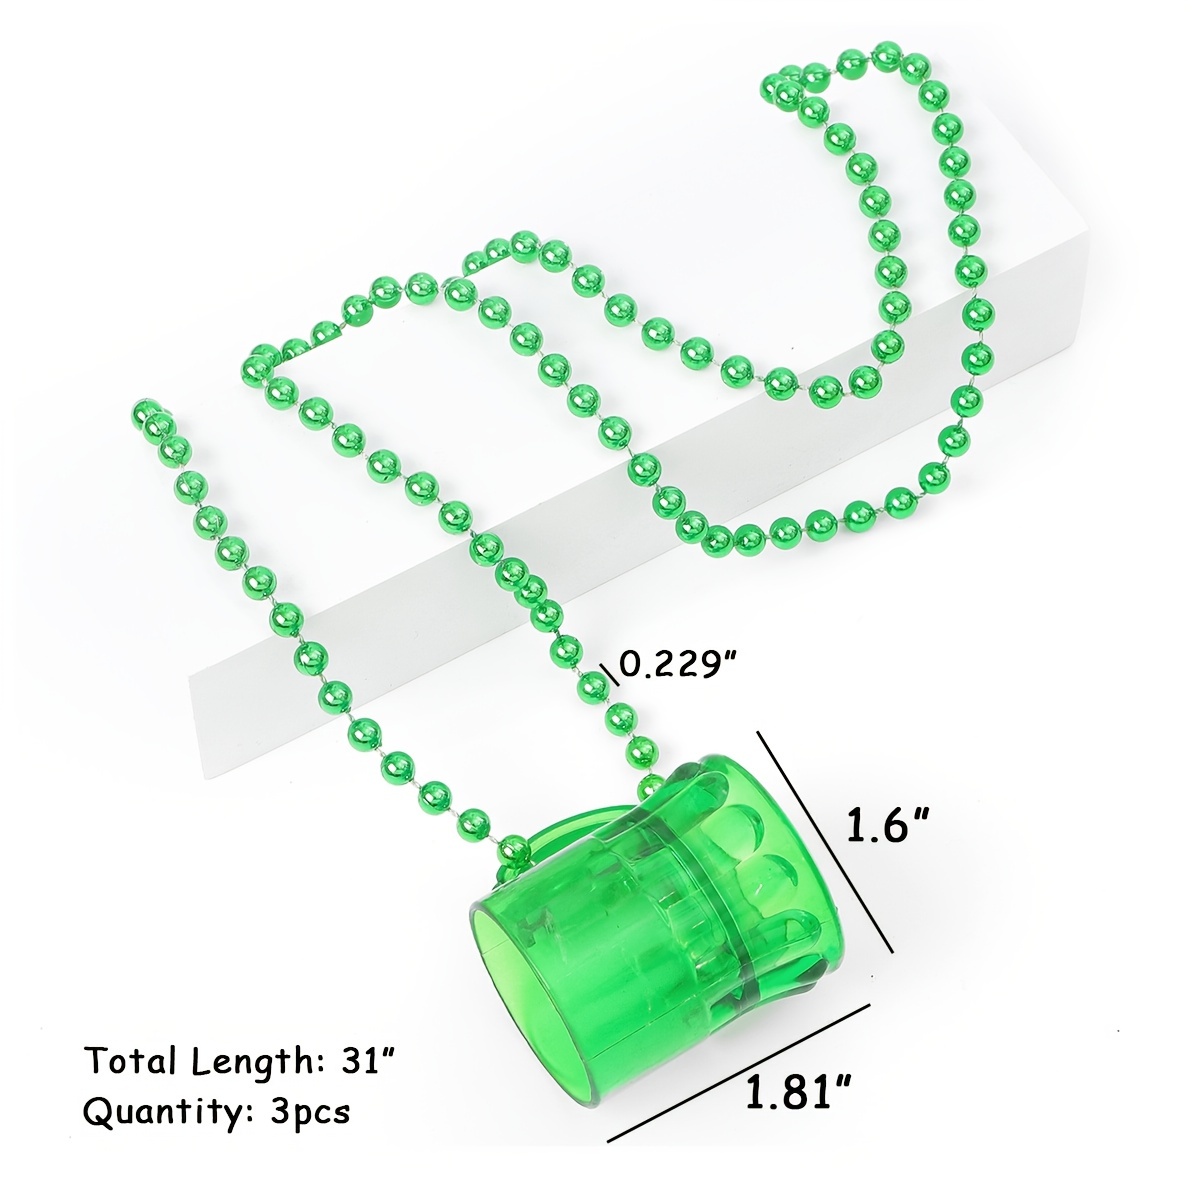 St. Patrick's Green Bead Necklaces Bulk Back: Party at Lewis Elegant Party  Supplies, Plastic Dinnerware, Paper Plates and Napkins